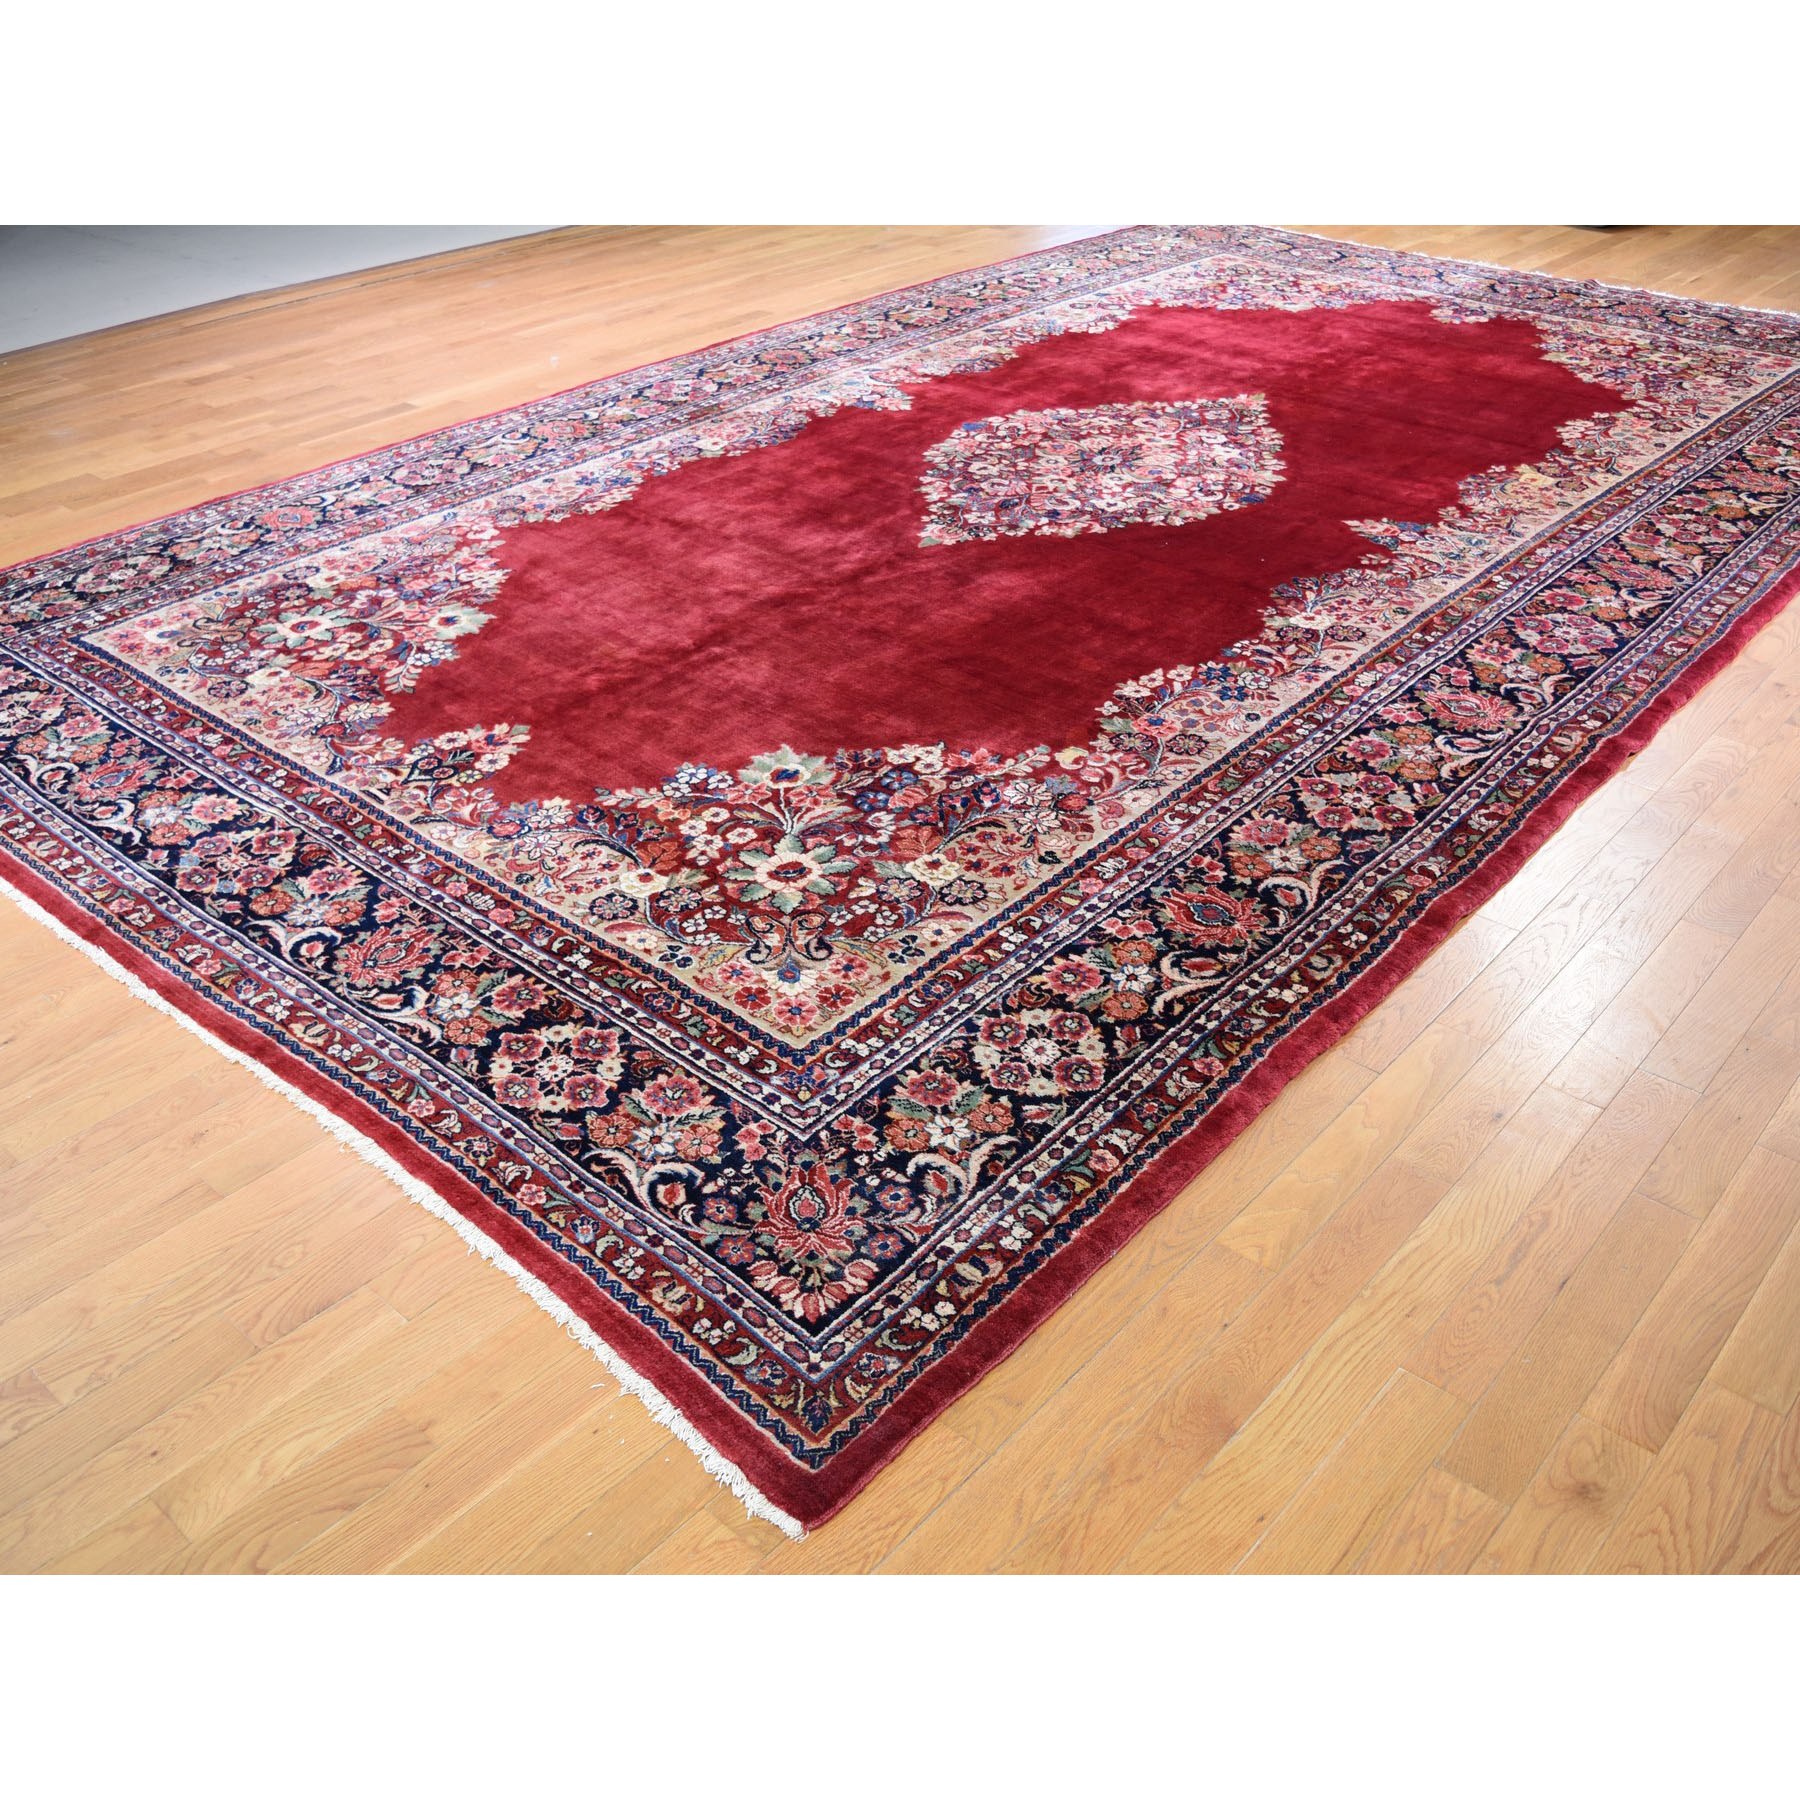 10-2 x17-3  Oversized Red Semi Antique Persian Sarouk Full Soft Pile Clean Open Field Hand Knotted Oriental Rug 